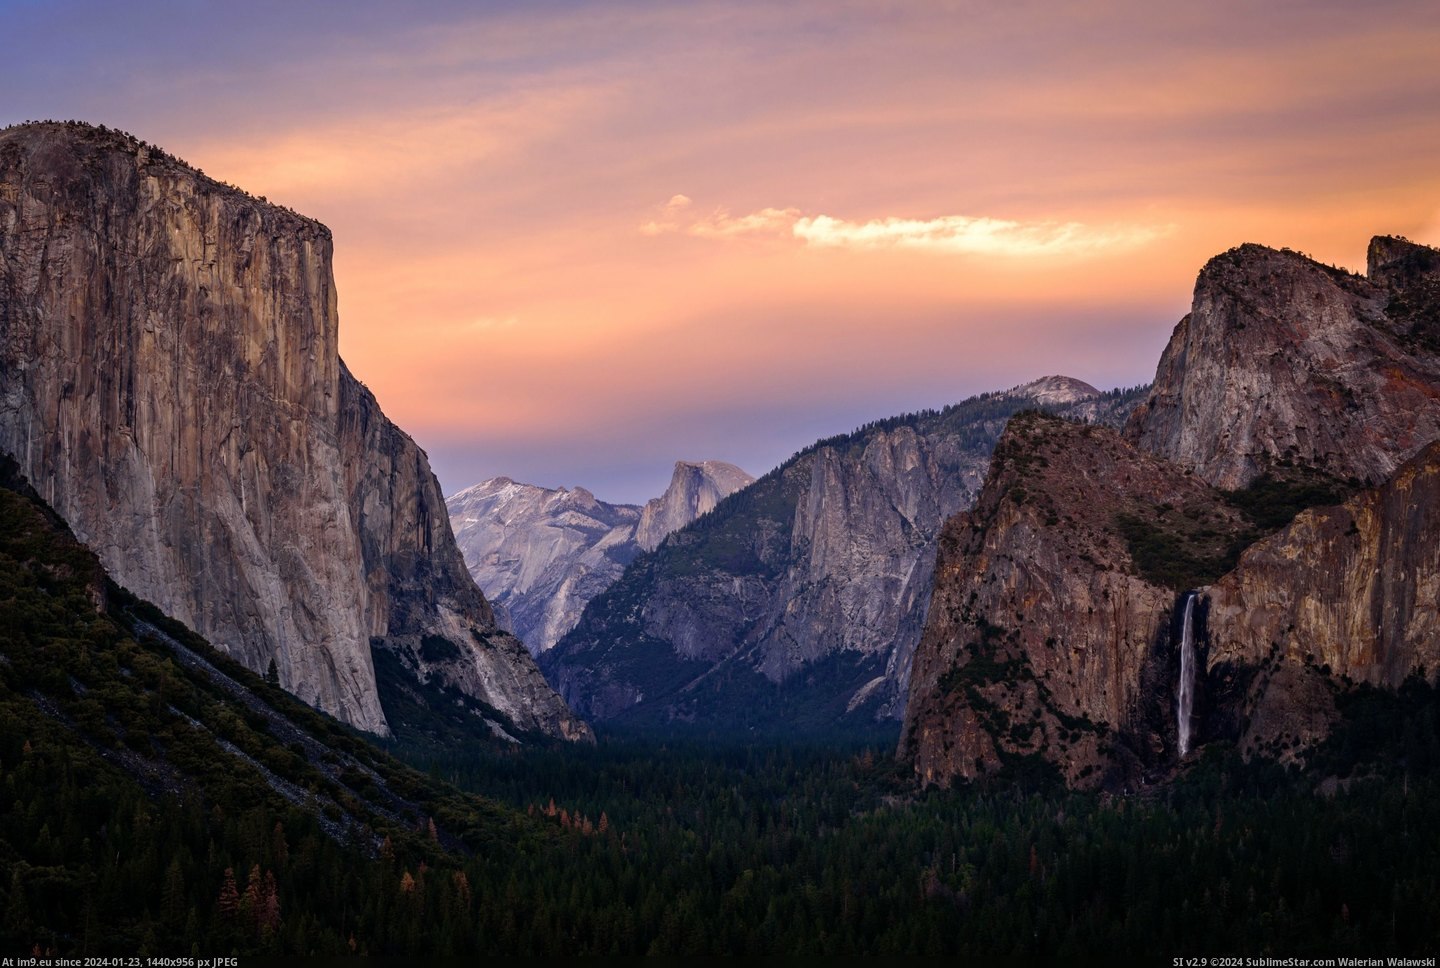 #Park #National #Usa #Yosemite #Tunnel #California #Exposed [Earthporn] The Tunnel View at Yosemite National Park, California, USA [5295x3535] Pic. (Bild von album My r/EARTHPORN favs))